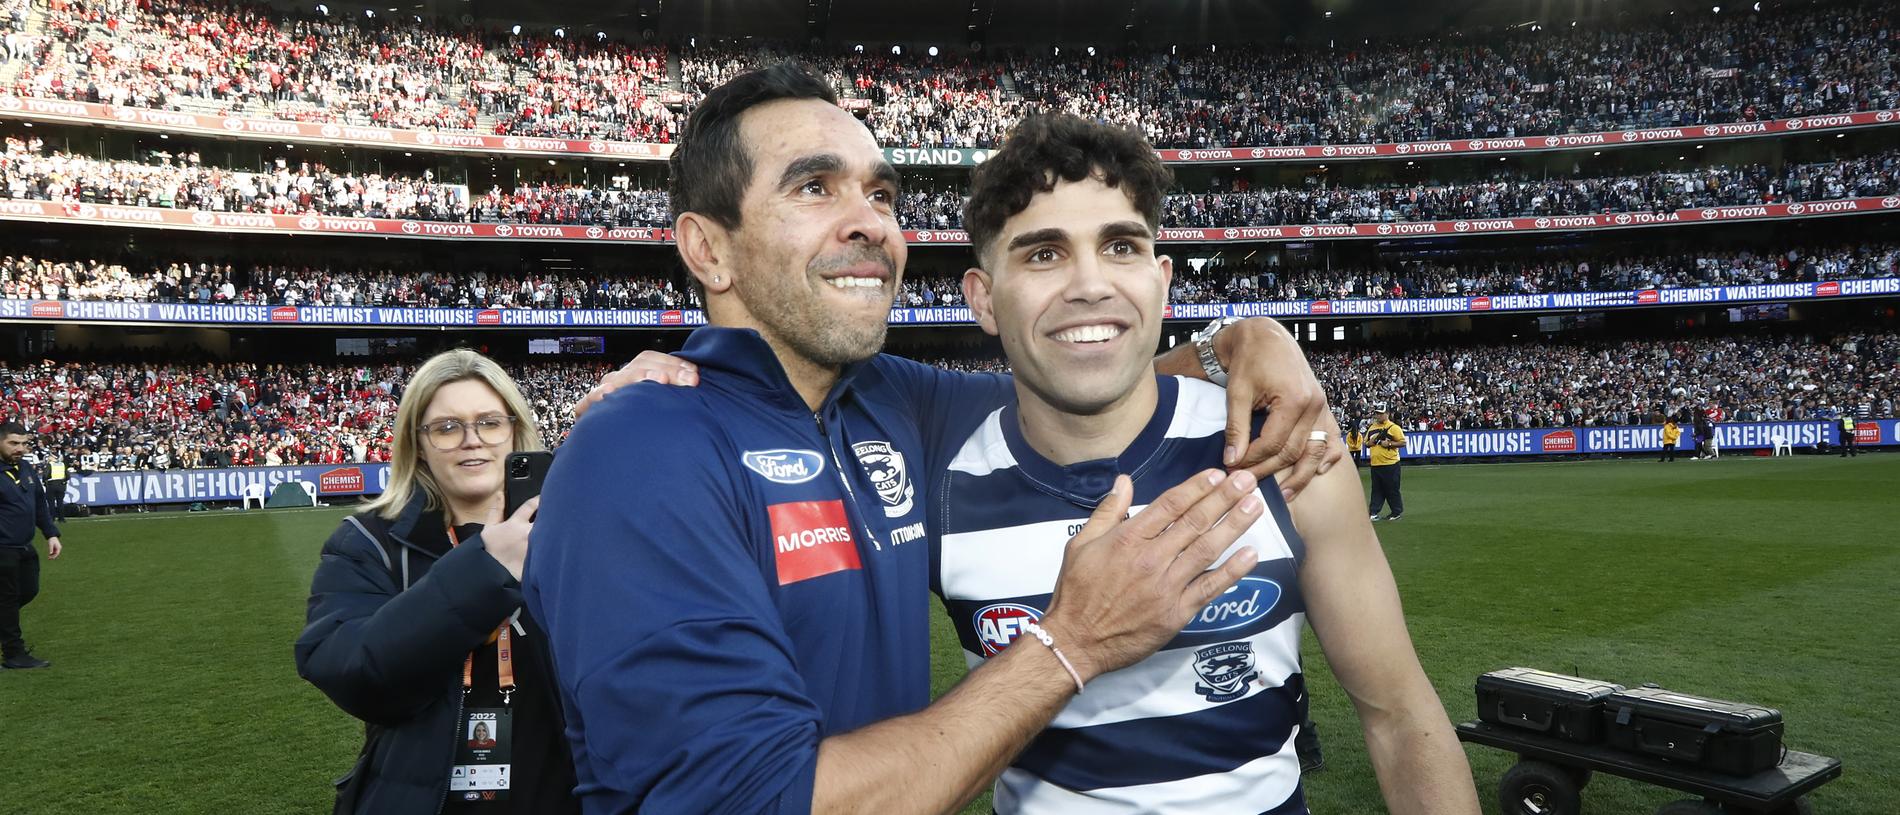 MELBOURNE, AUSTRALIA - SEPTEMBER 24: Geelong Assistant Eddie Betts and Tyson Stengle of the Cats embrace after the 2022 AFL Grand Final match between the Geelong Cats and the Sydney Swans at the Melbourne Cricket Ground on September 24, 2022 in Melbourne, Australia. (Photo by Darrian Traynor/AFL Photos/via Getty Images)